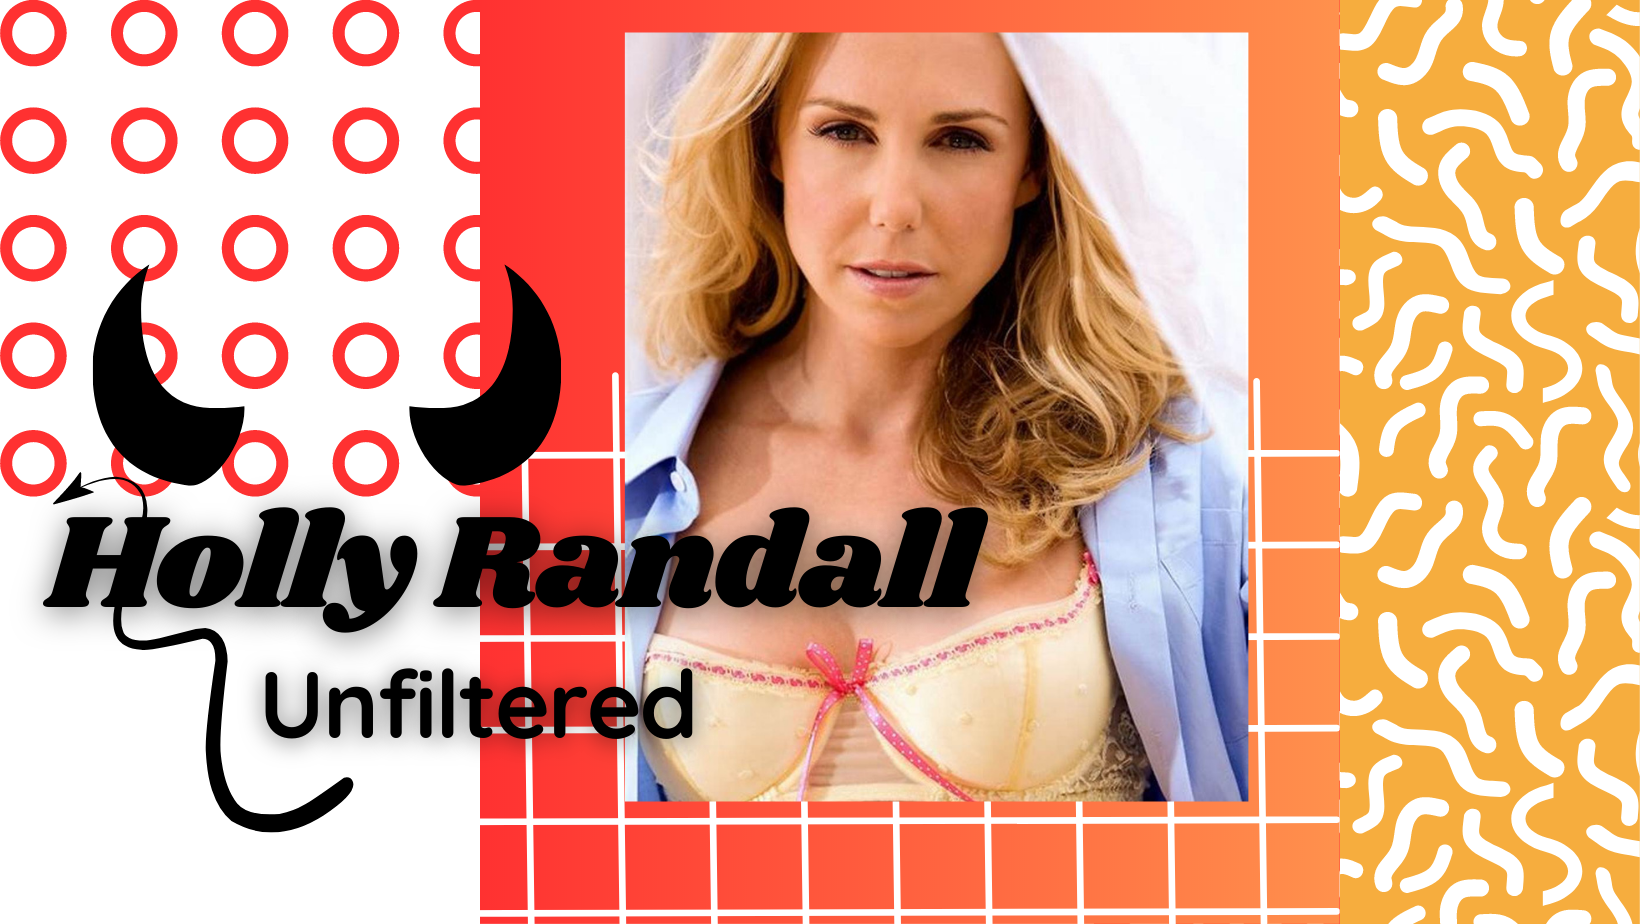 Holly Randall Unfiltered - Listen Here